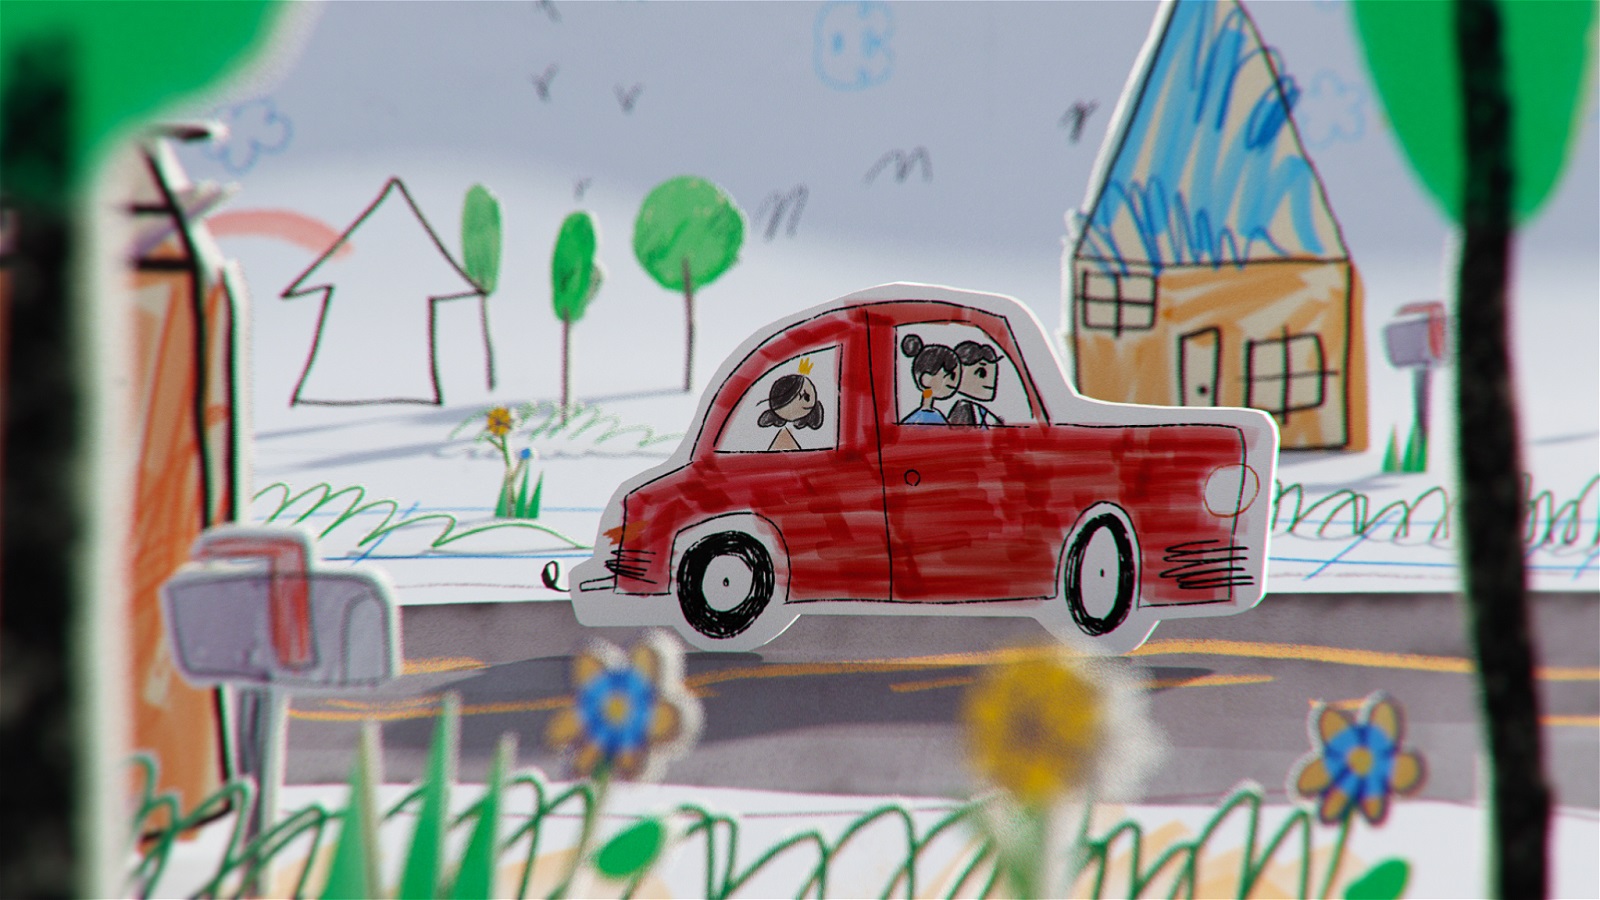 A Kid’s True Story Inspires NMDOT’s PSA Campaign